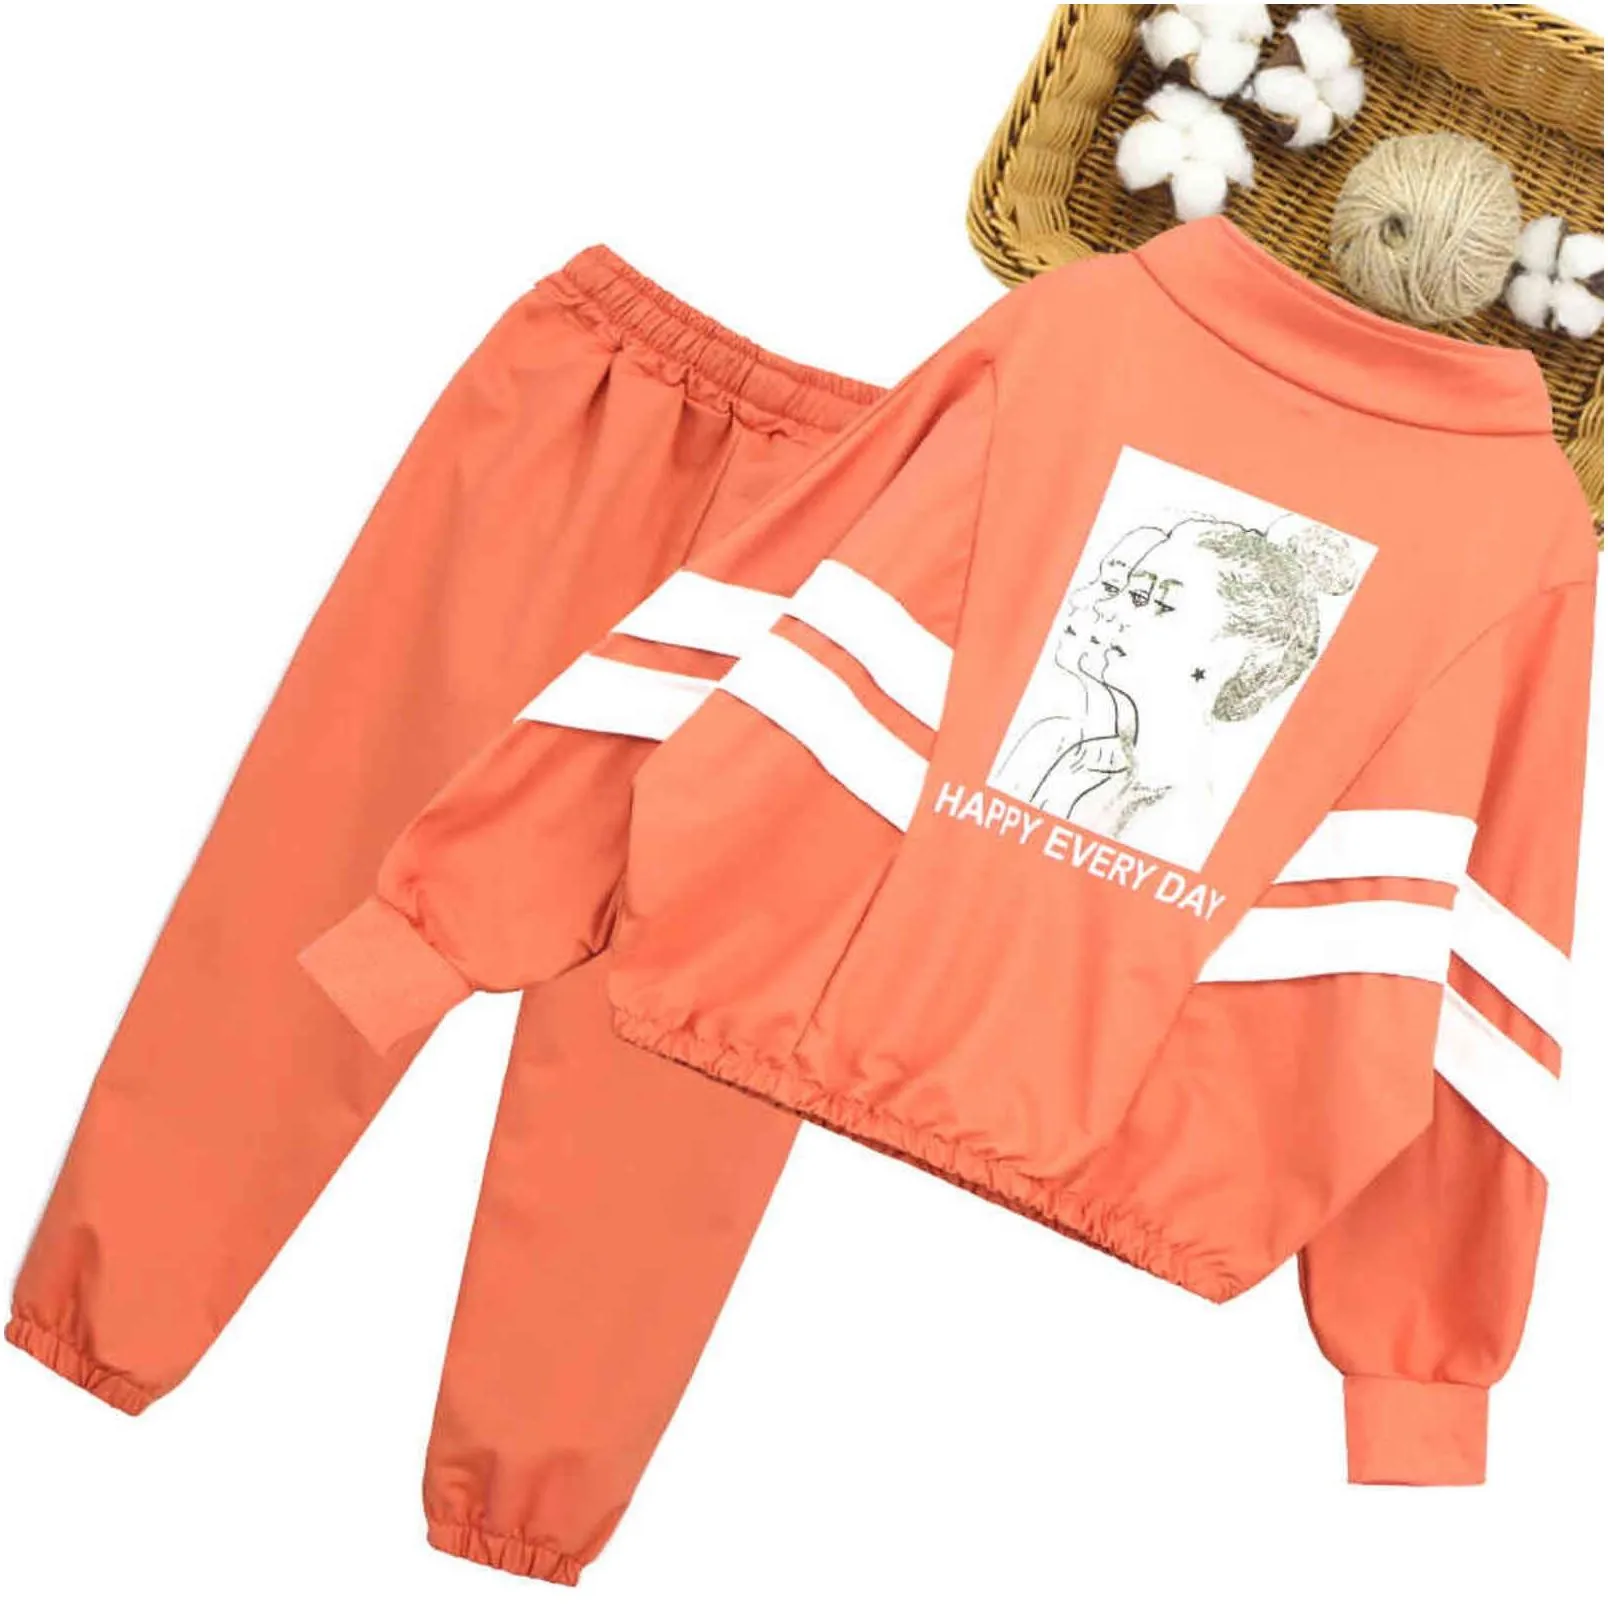 Clothing Sets Girls Sport Clothes Striped Clothing For Coat Add Pants 2Pcs Girl Teenage Childrens School 6 8 10 12 14 211104 Drop Deli Dhtxm